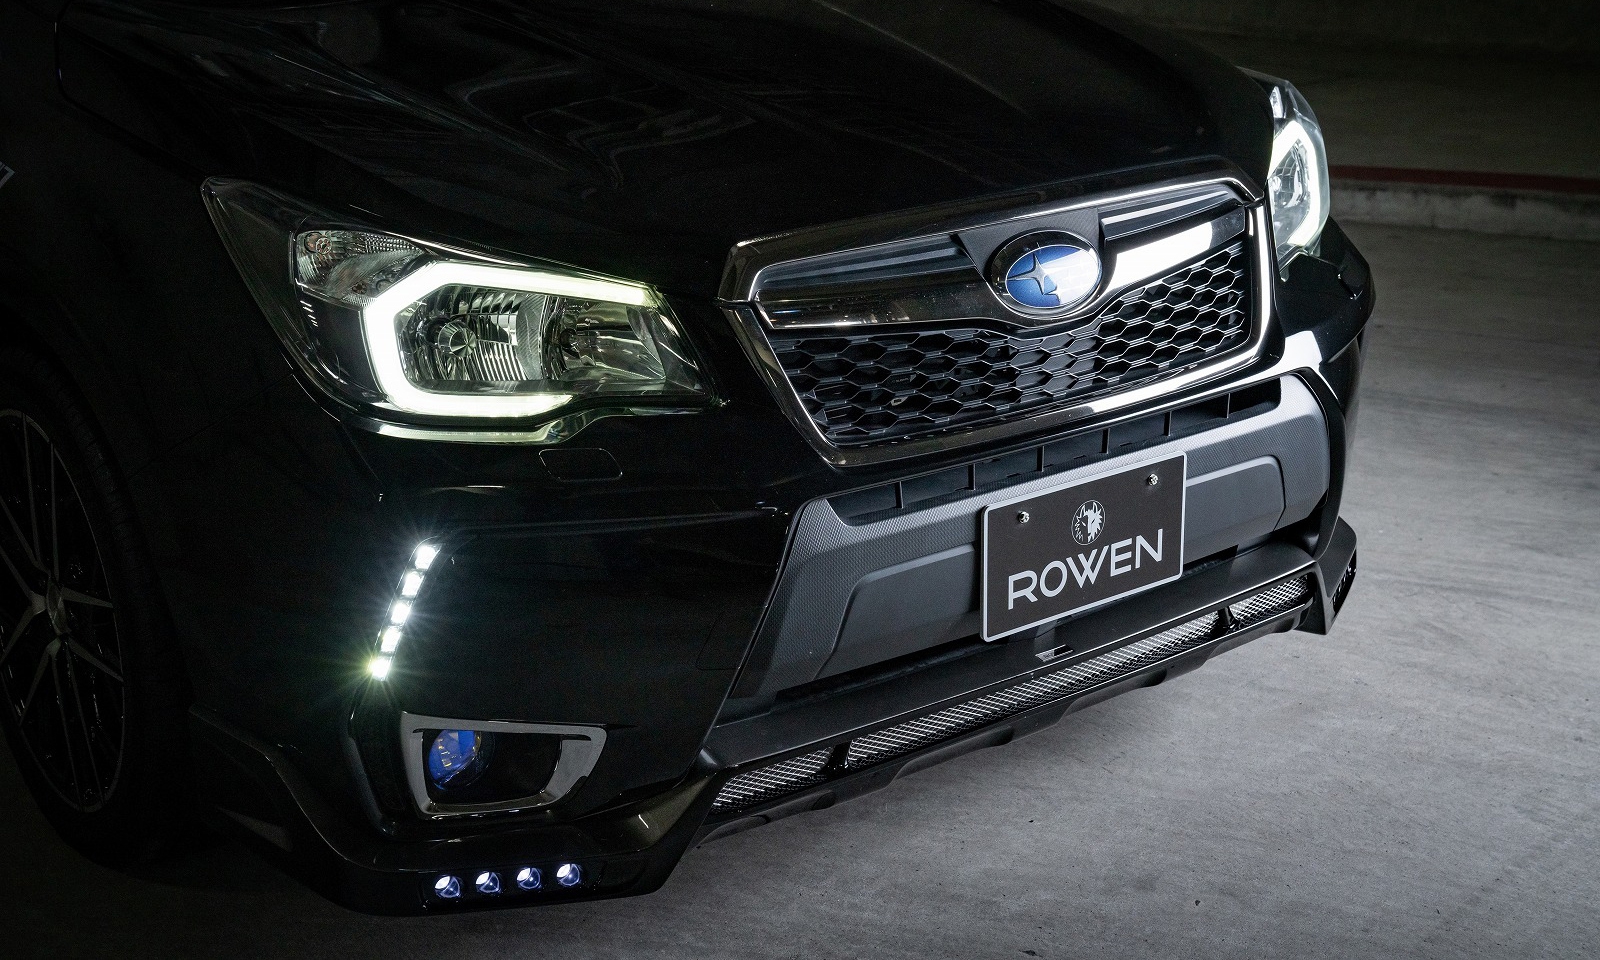 Check our price and buy Rowen body kit for Subaru Forester SJG!